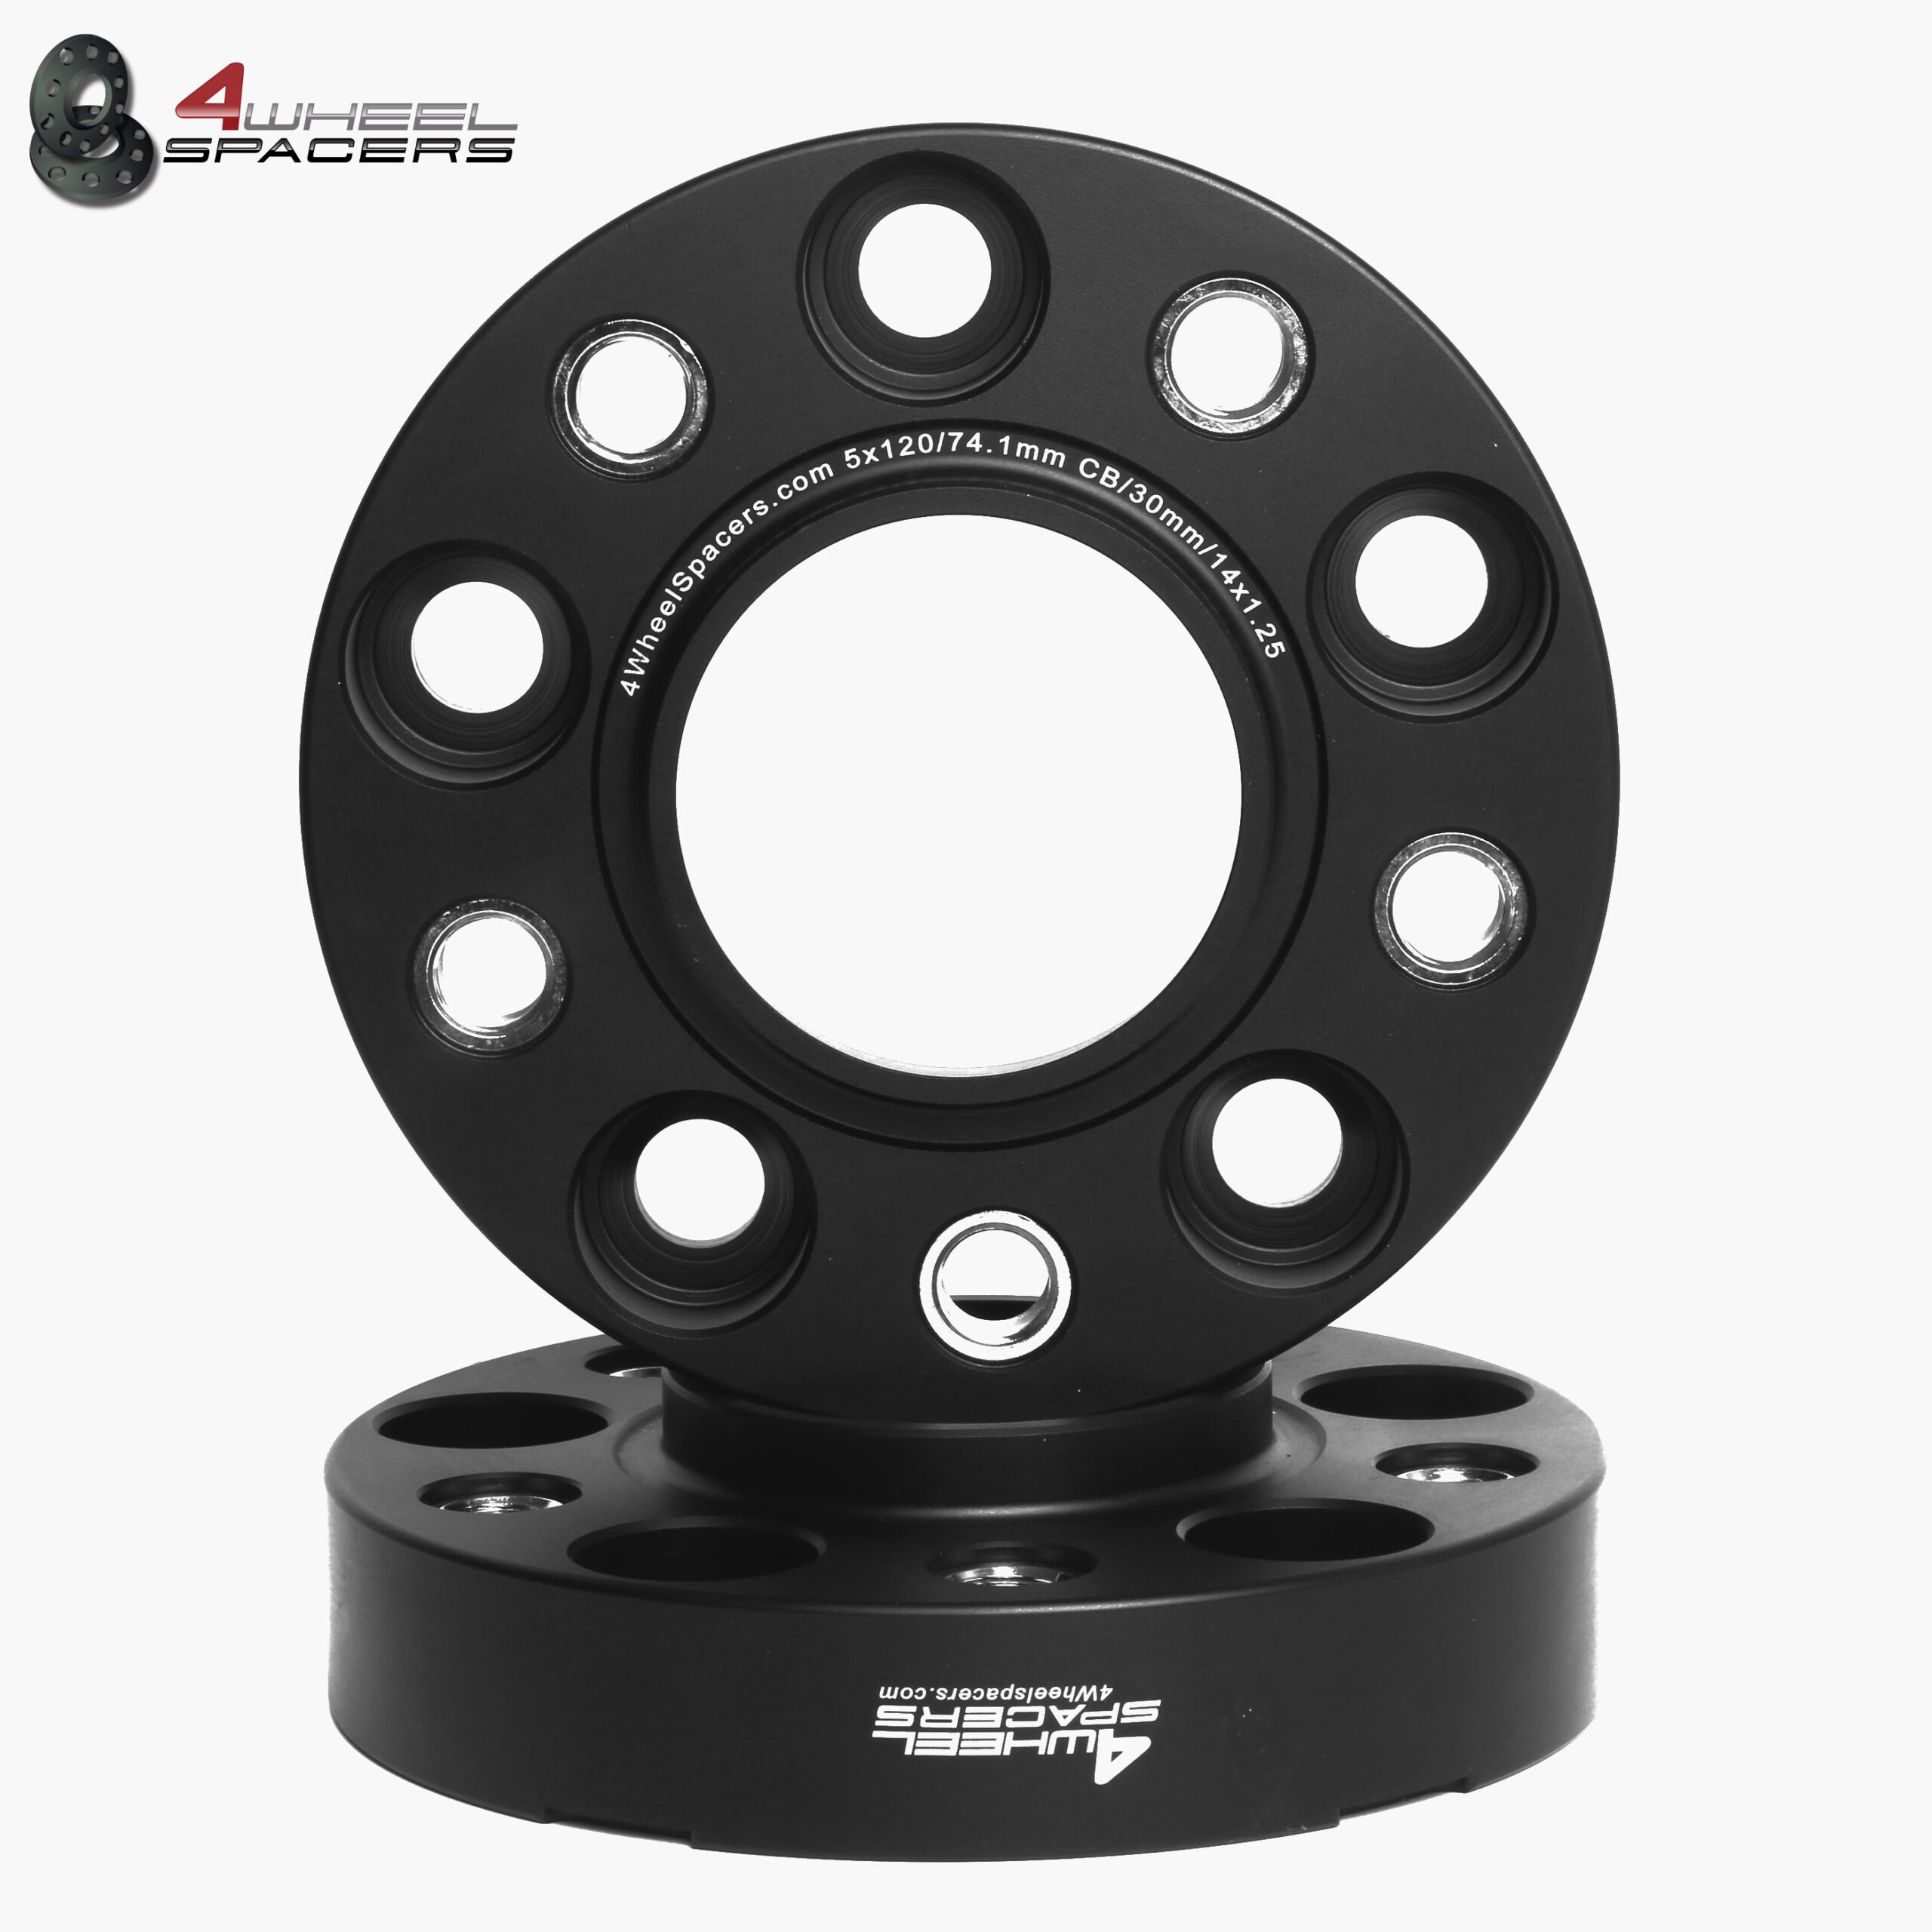 30mm Bolt-On Hubcentric Wheel Spacers 1 Pair for ƁMW 3 Series Alloy Wheels PN.SFP-2BS02B+10SB02116 